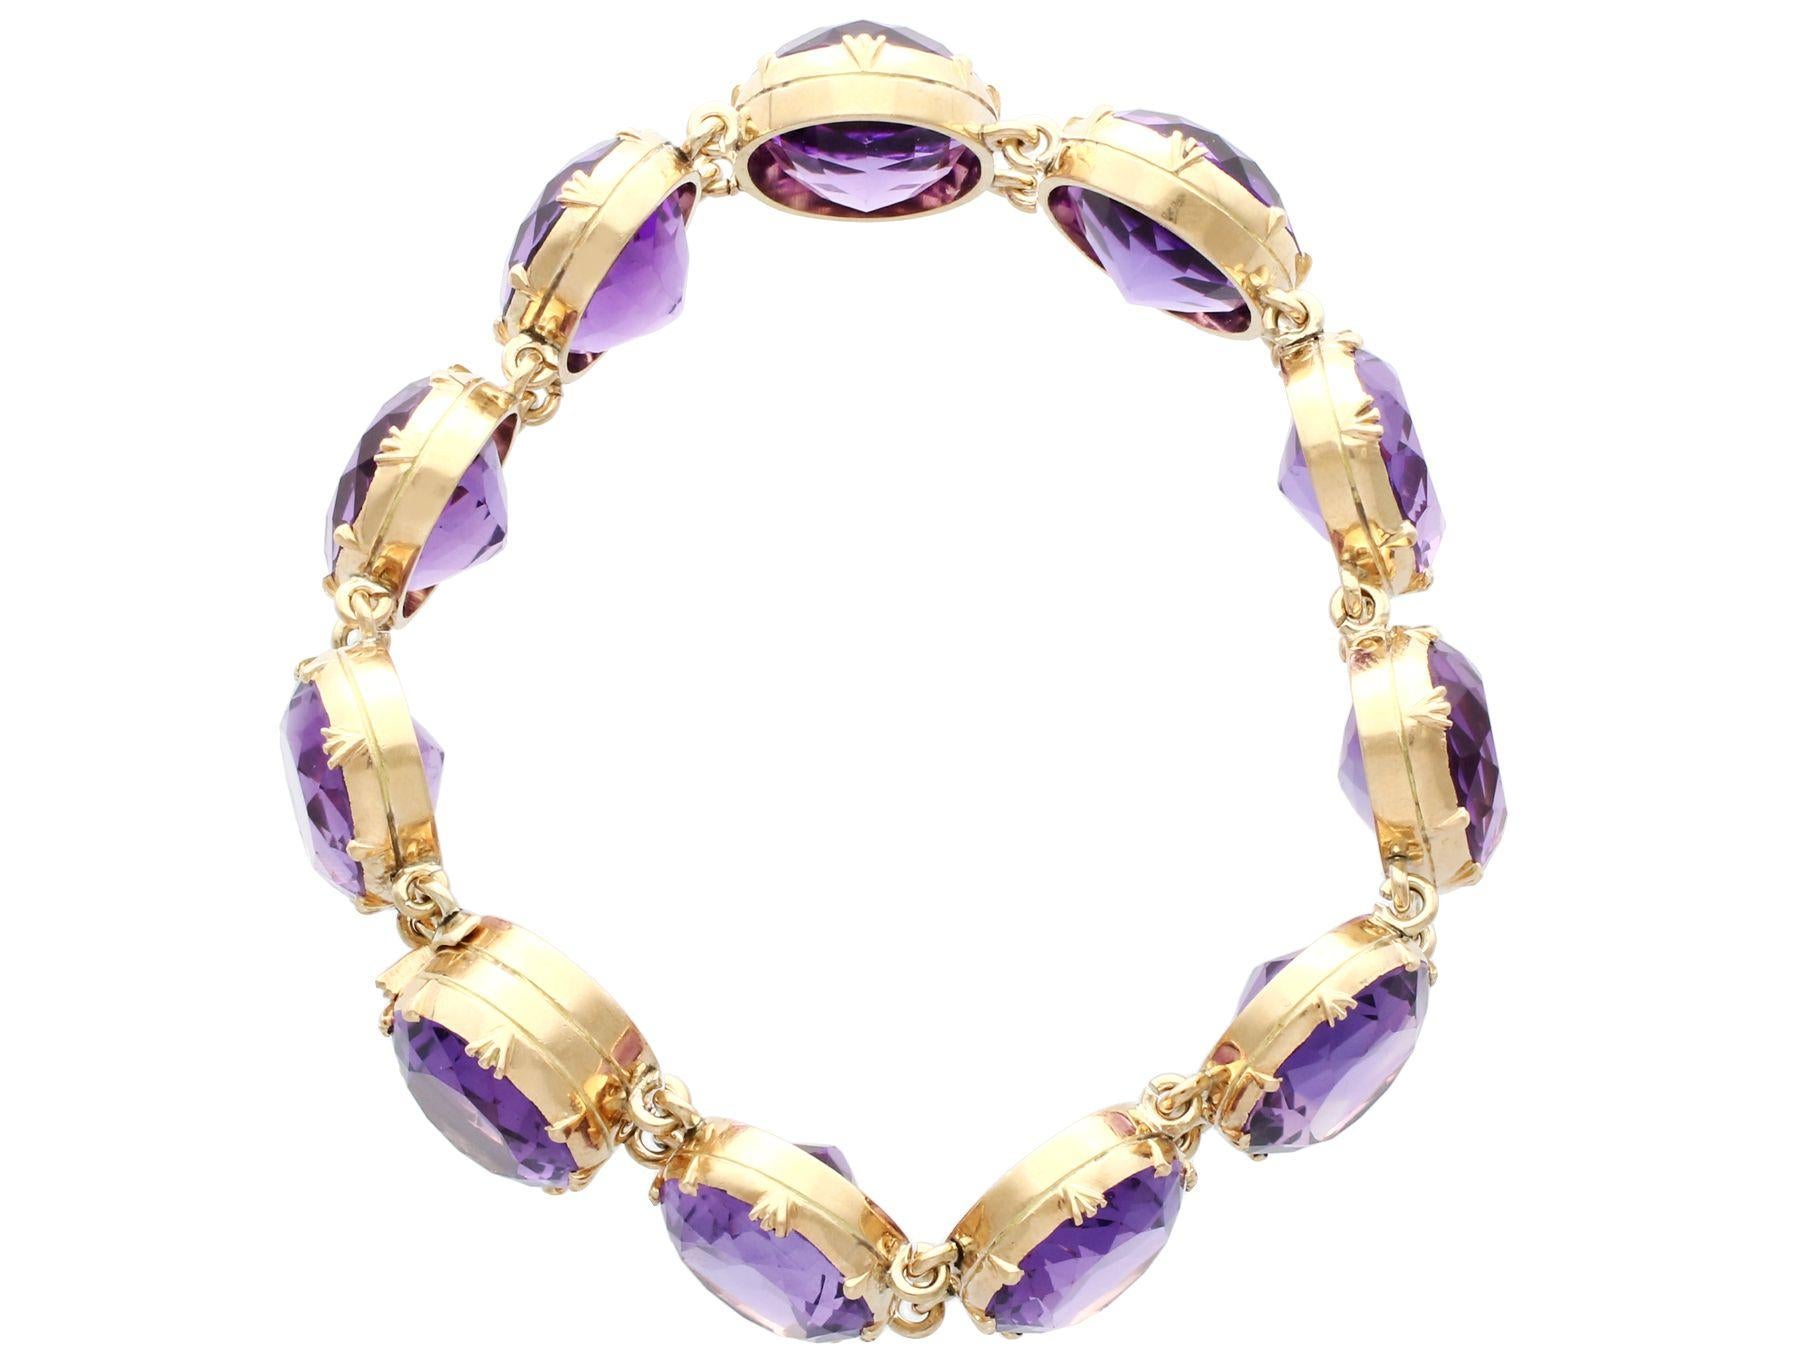 A stunning, fine and impressive antique 1870's Victorian 193.38 carat amethyst and 12 carat yellow gold bracelet; part of our diverse antique jewellery and estate jewelry collections.

This stunning antique Victorian bracelet has been crafted in